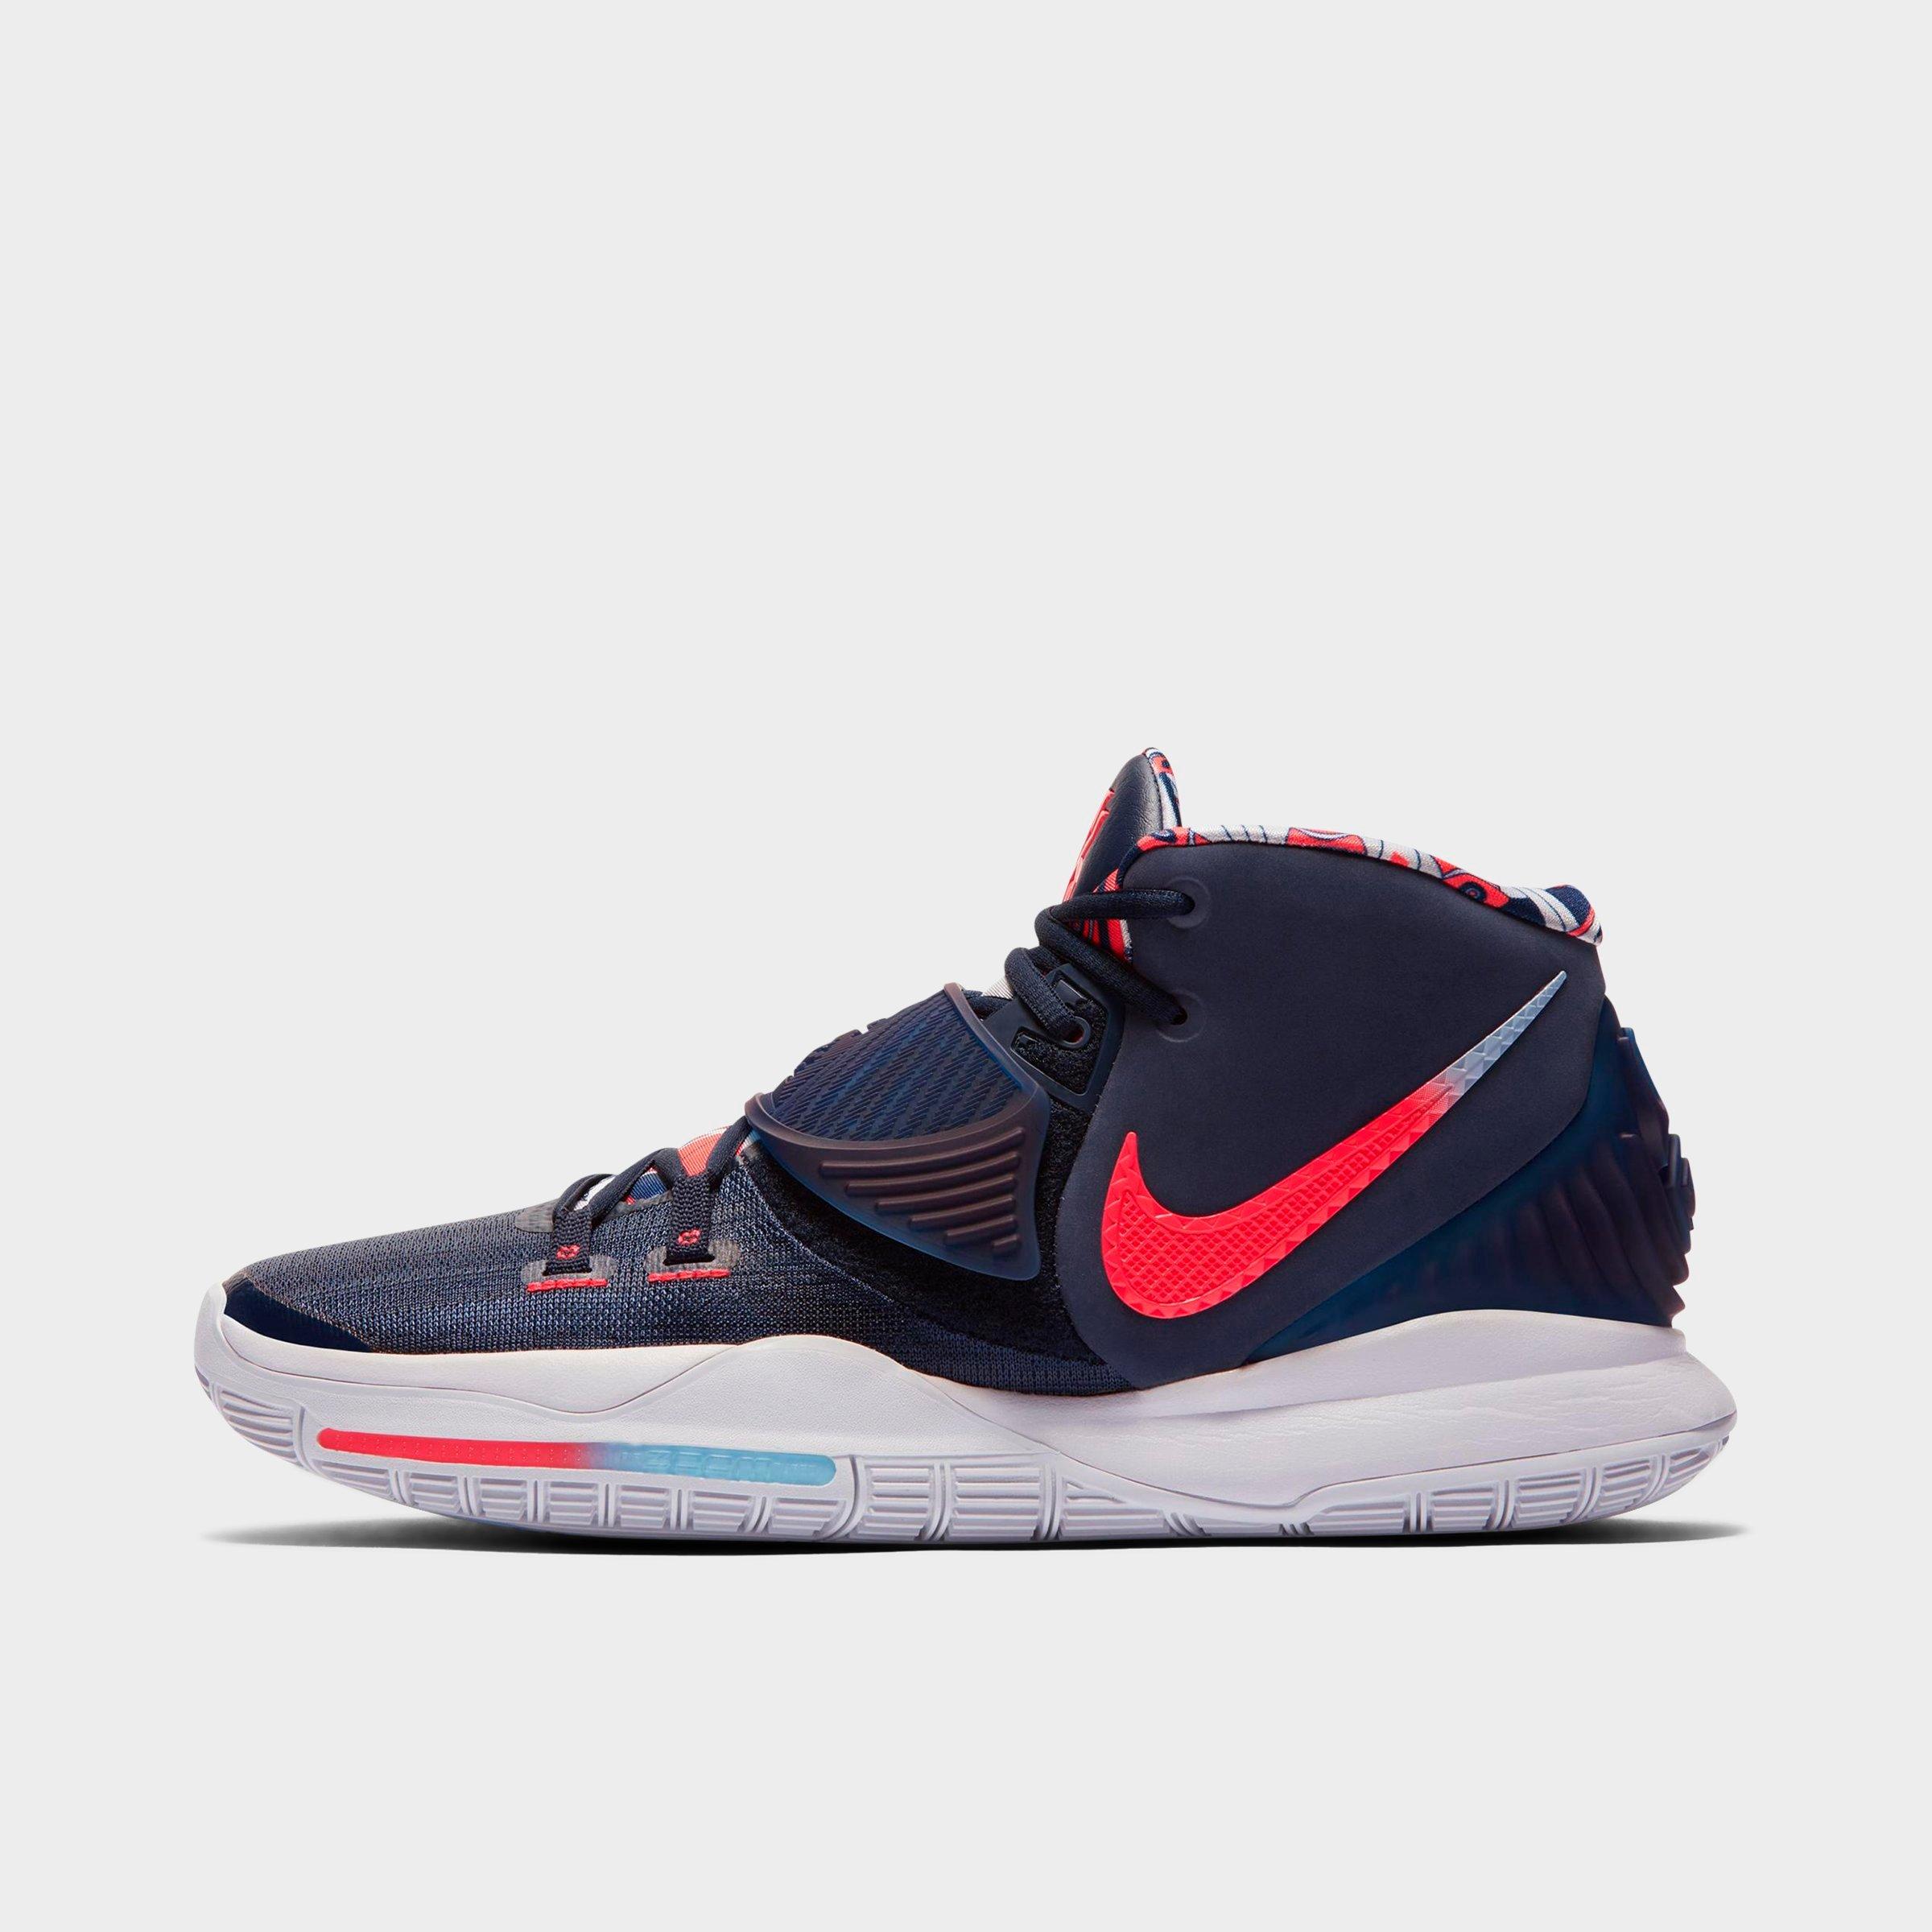 kyrie irving sneakers for sale